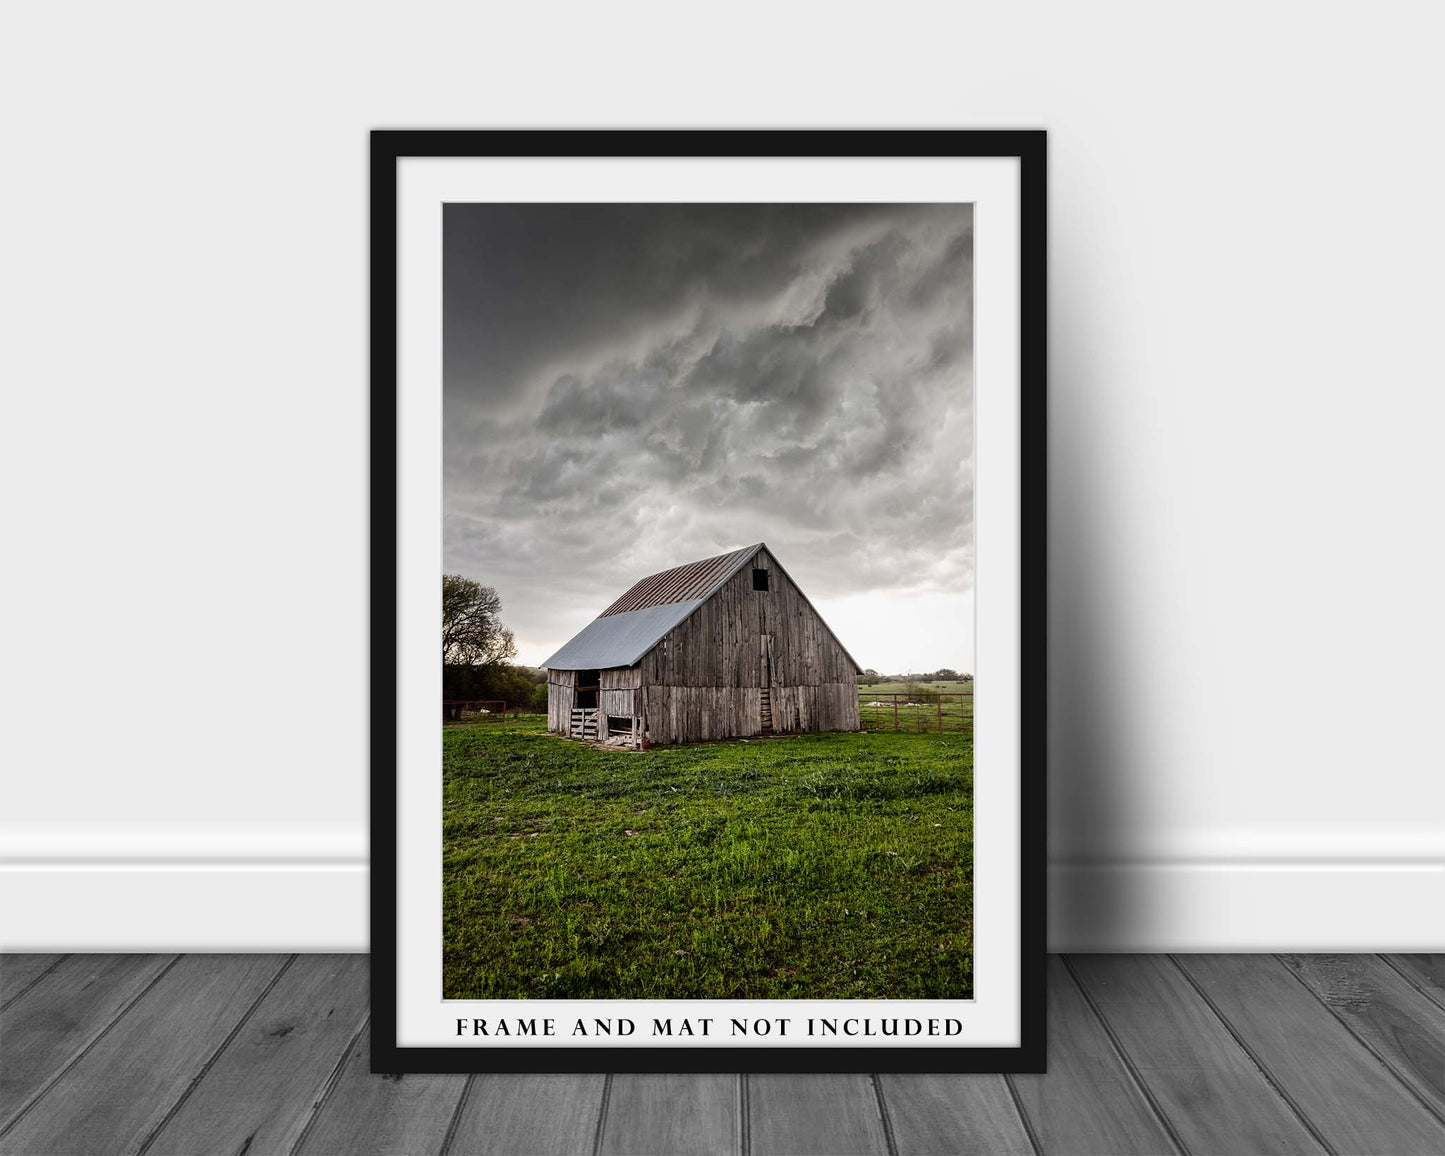 Country Photo Print | Rustic Barn Under Storm Clouds Picture | Texas Wall Art | Vertical Landscape Photography | Farmhouse Decor